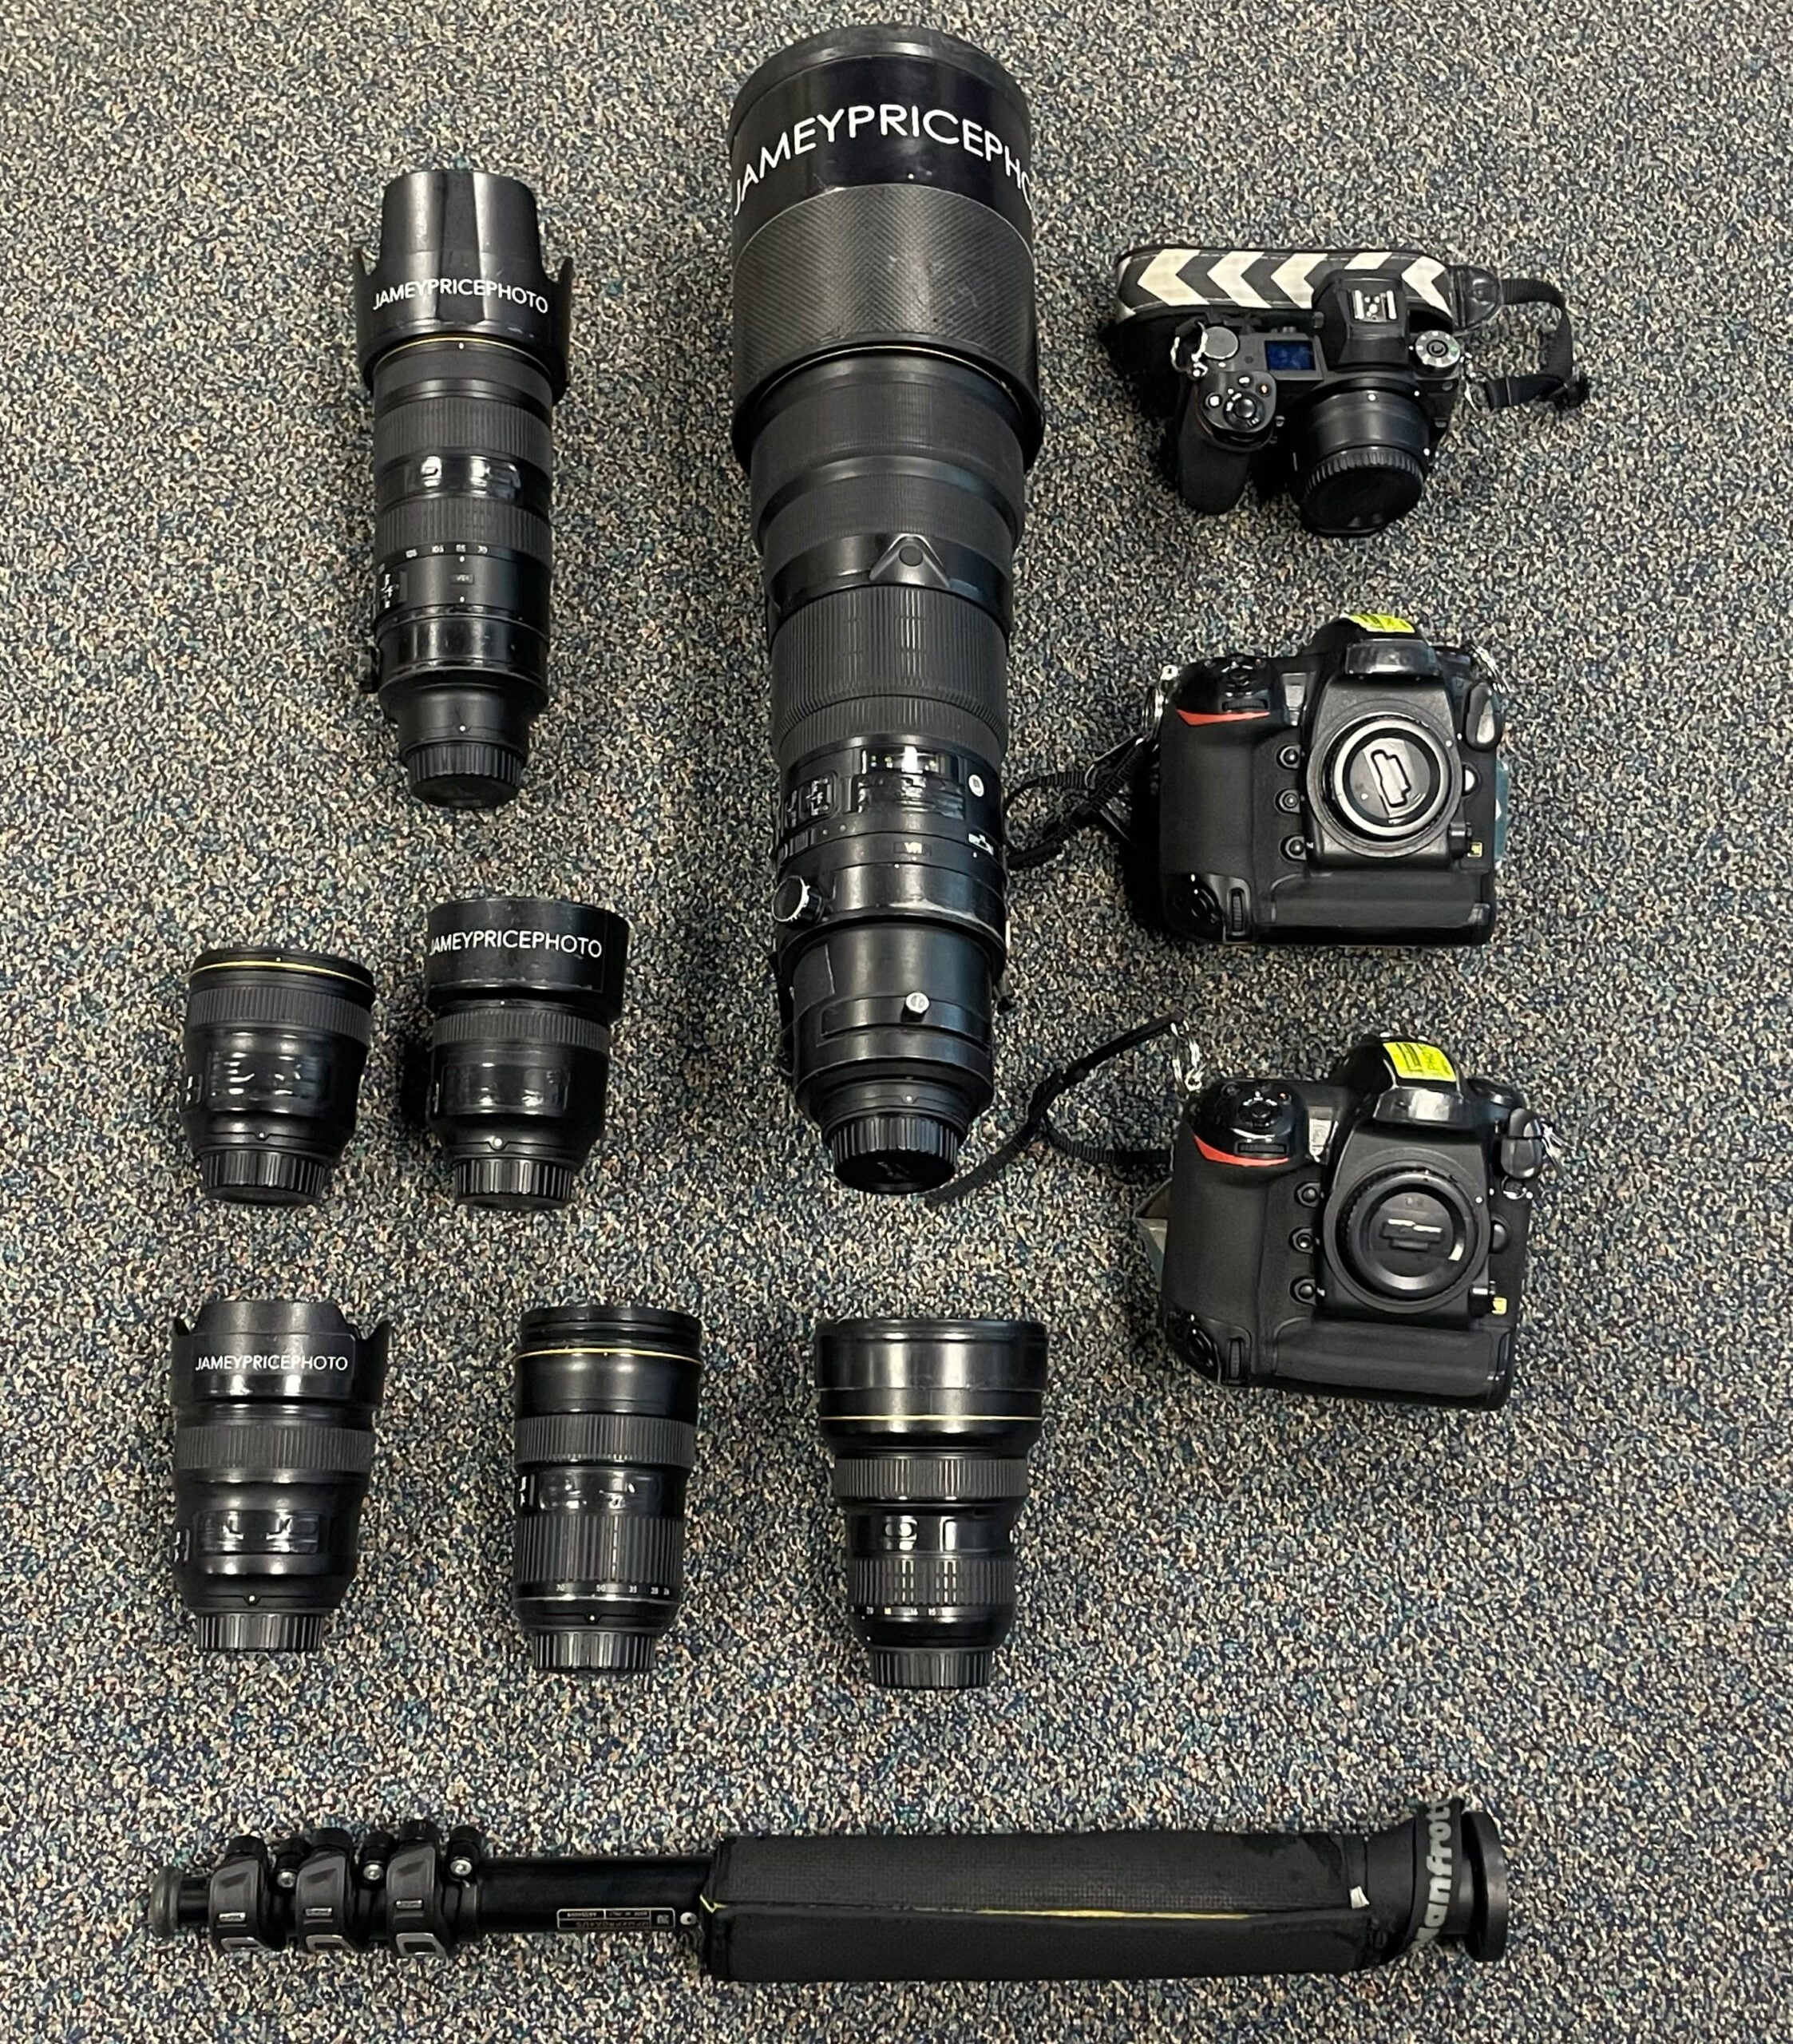 The gear used by Jamey Price to photograph the 2022 Rolex 24 at Daytona, a 24-hour race held at Daytona International Speedway.